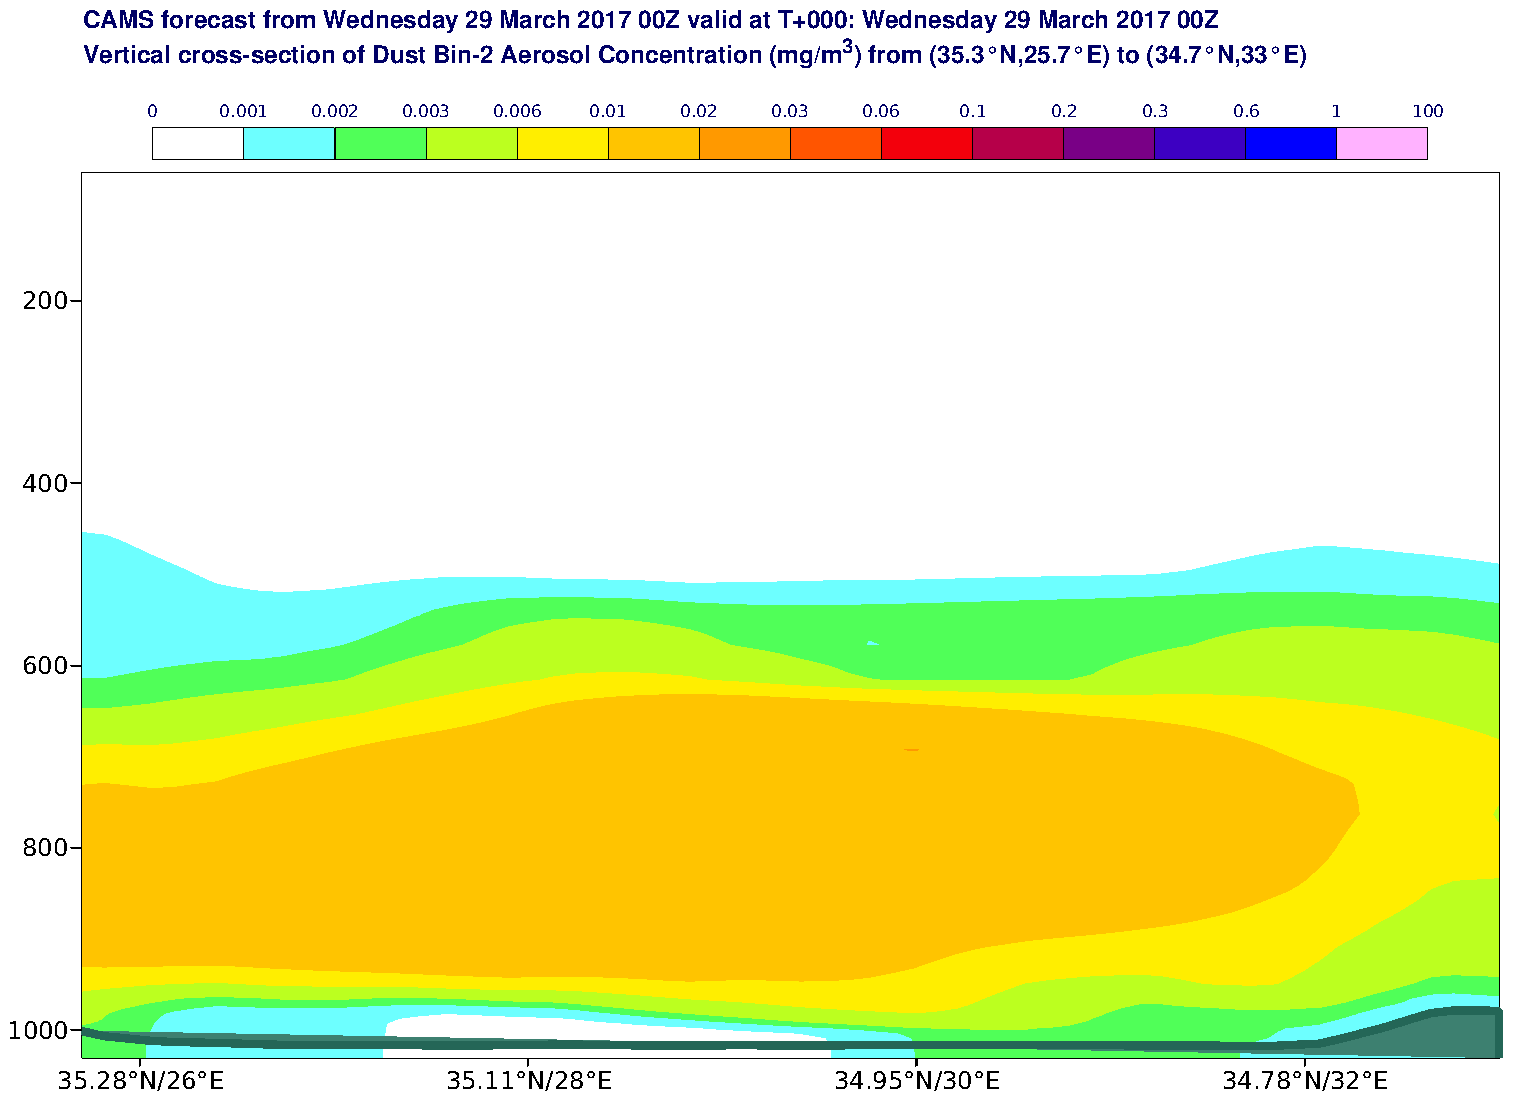 Vertical cross-section of Dust Bin-2 Aerosol Concentration (mg/m3) valid at T0 - 2017-03-29 00:00